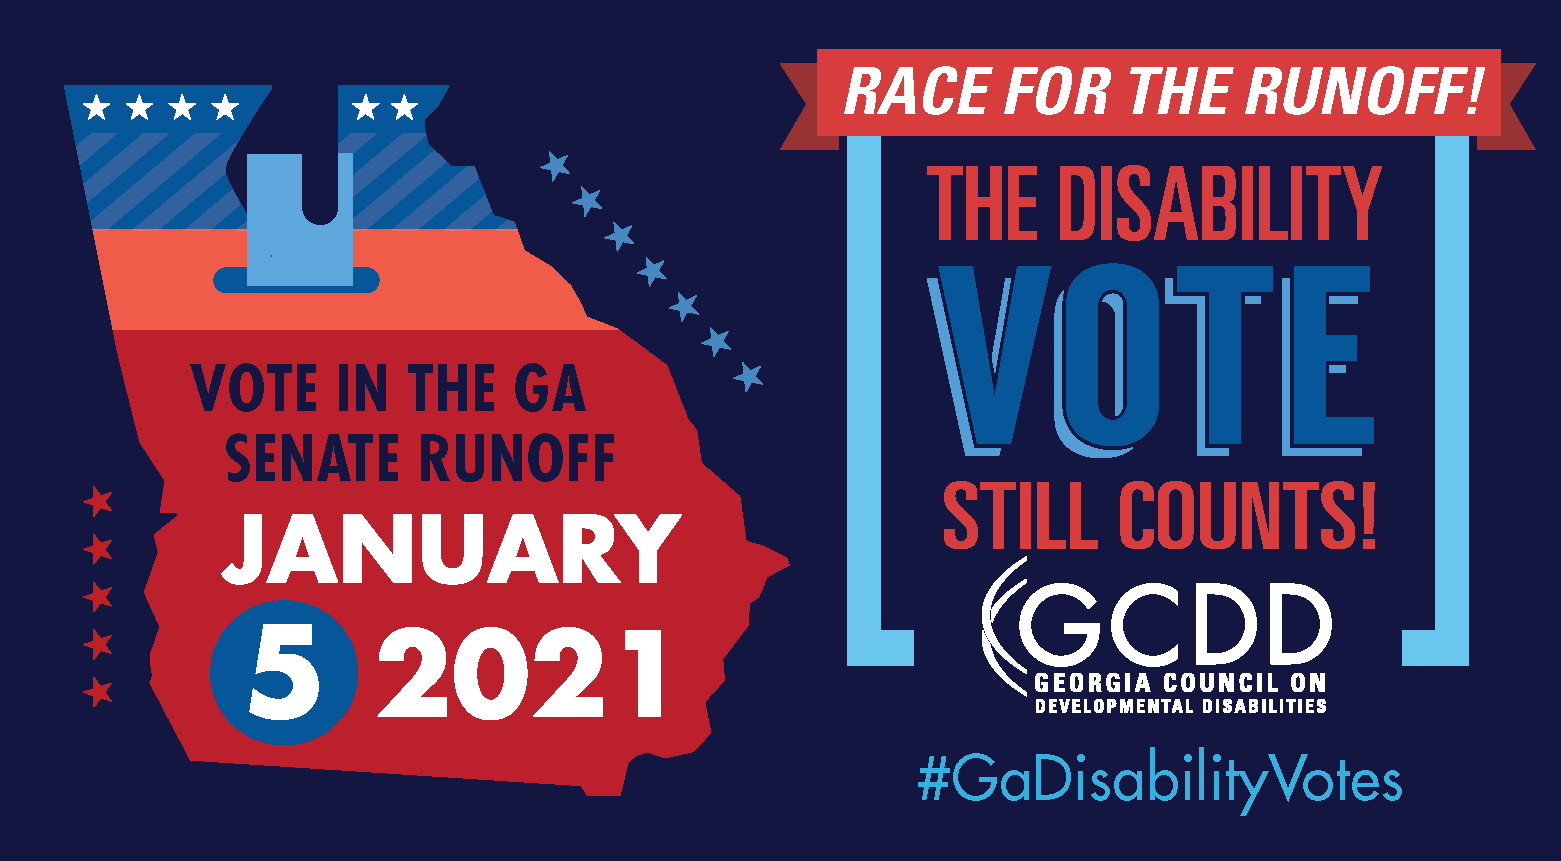 This graphic has a ballot box in the outline of the state of Georgia with the words “Vote in the GA Senate Runoff! January 5, 2021” and a red banner with “Race For the Runoff!” above the words “The Disability Vote Still Counts!” 